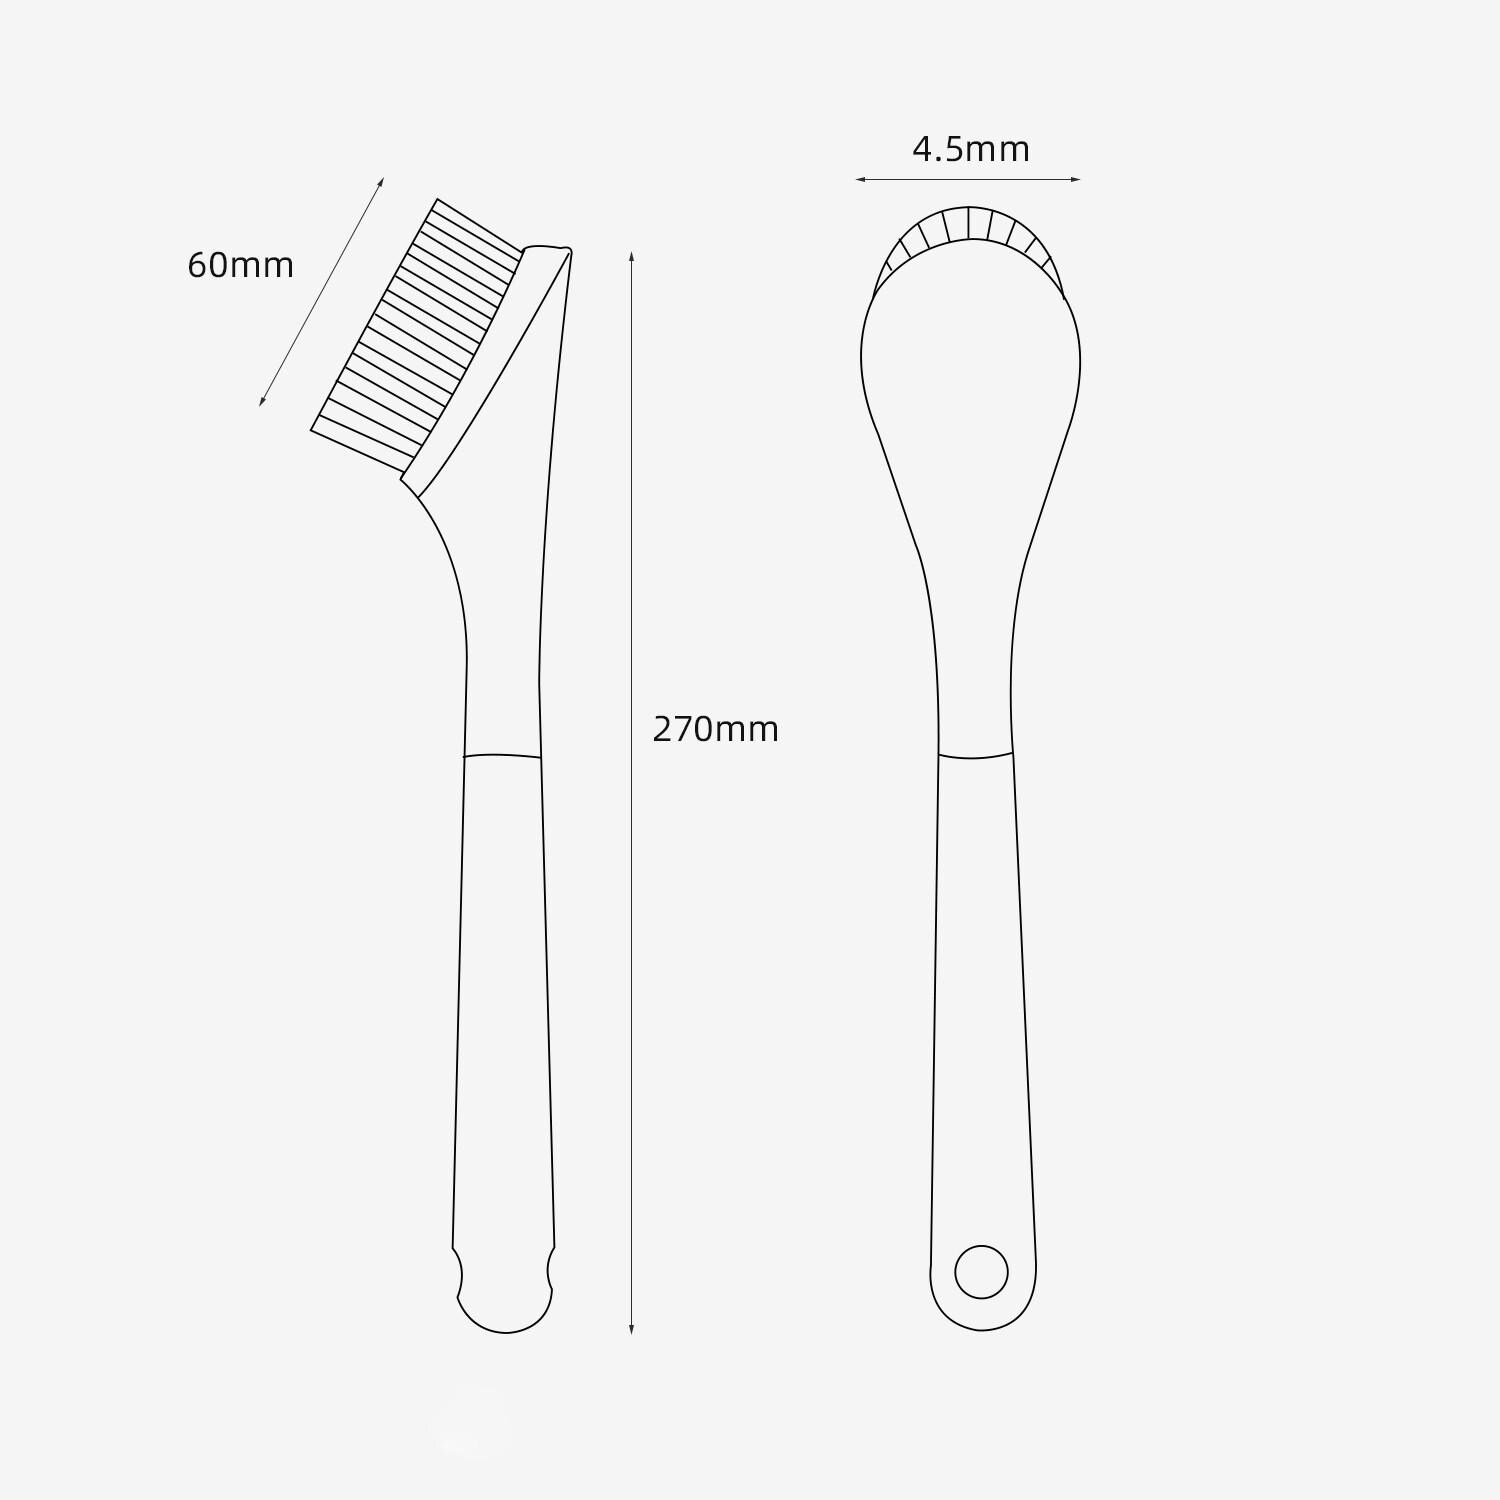 https://ak1.ostkcdn.com/images/products/is/images/direct/ab02daa3d67b30a73fb894e581d99ca437311961/Kitchen-Dish-Brush-Beech-Handle-Cleaning-Brush-For-Pans-Pots-Sink-Cleaning.jpg